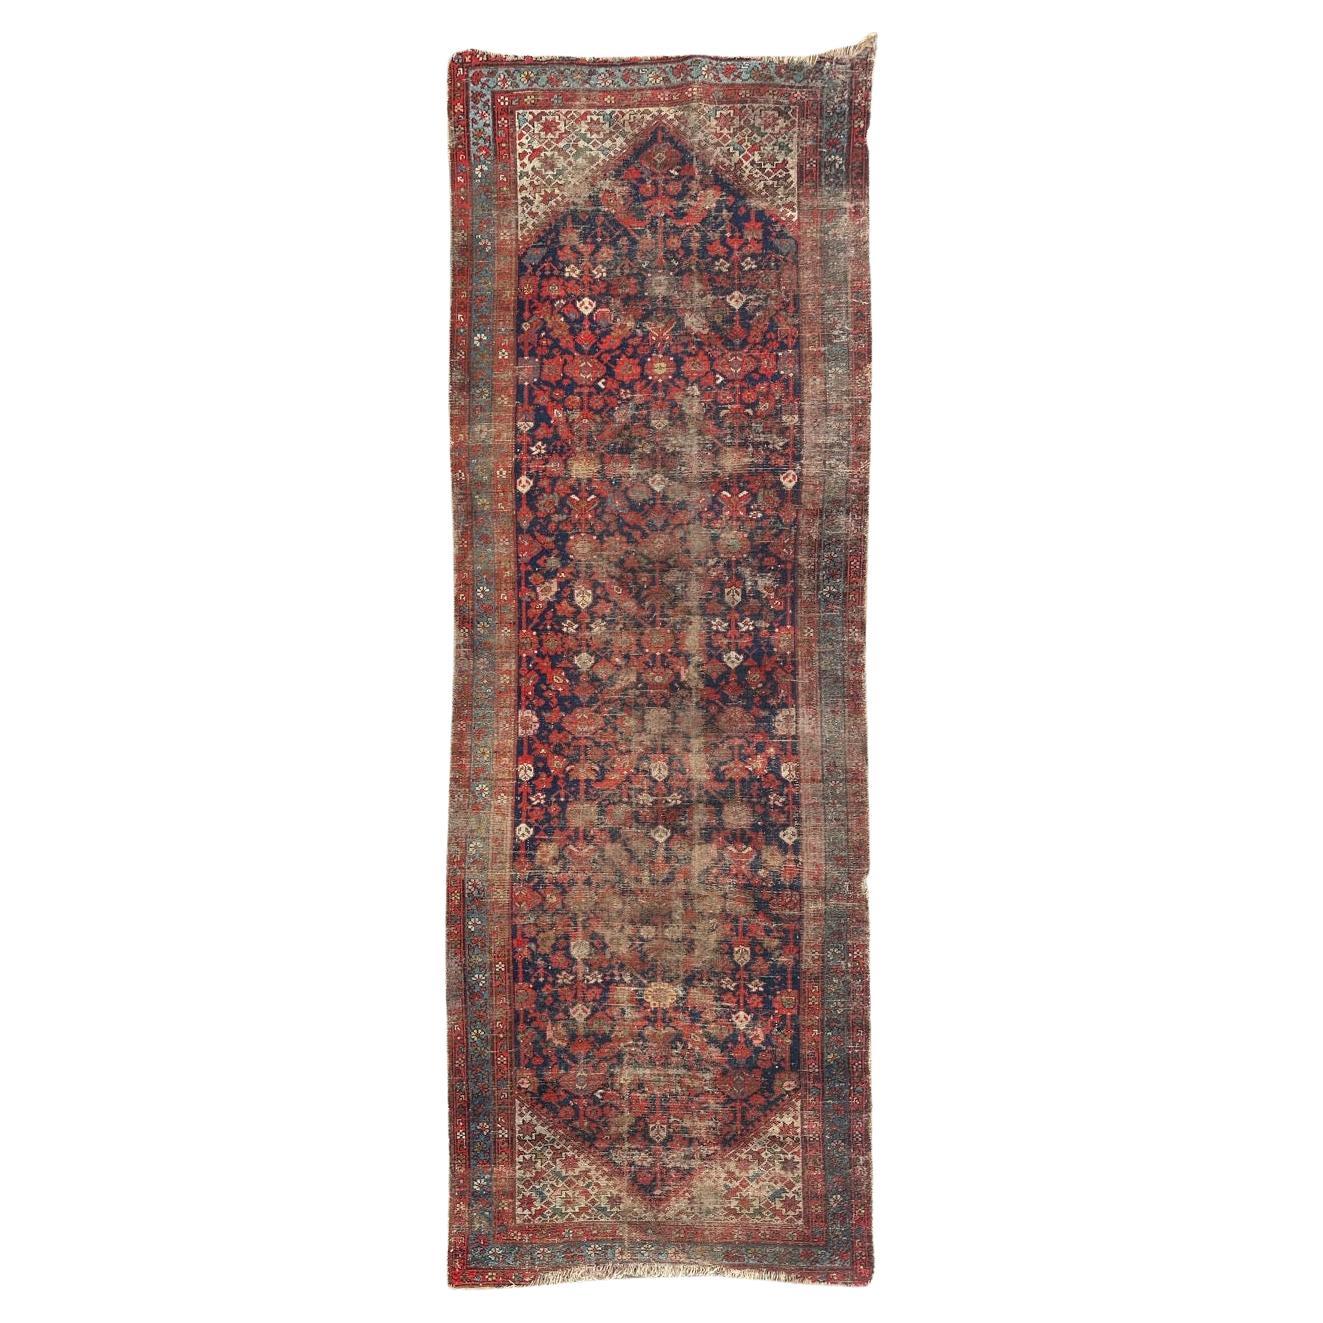 Bobyrug’s distressed antique malayer runner 